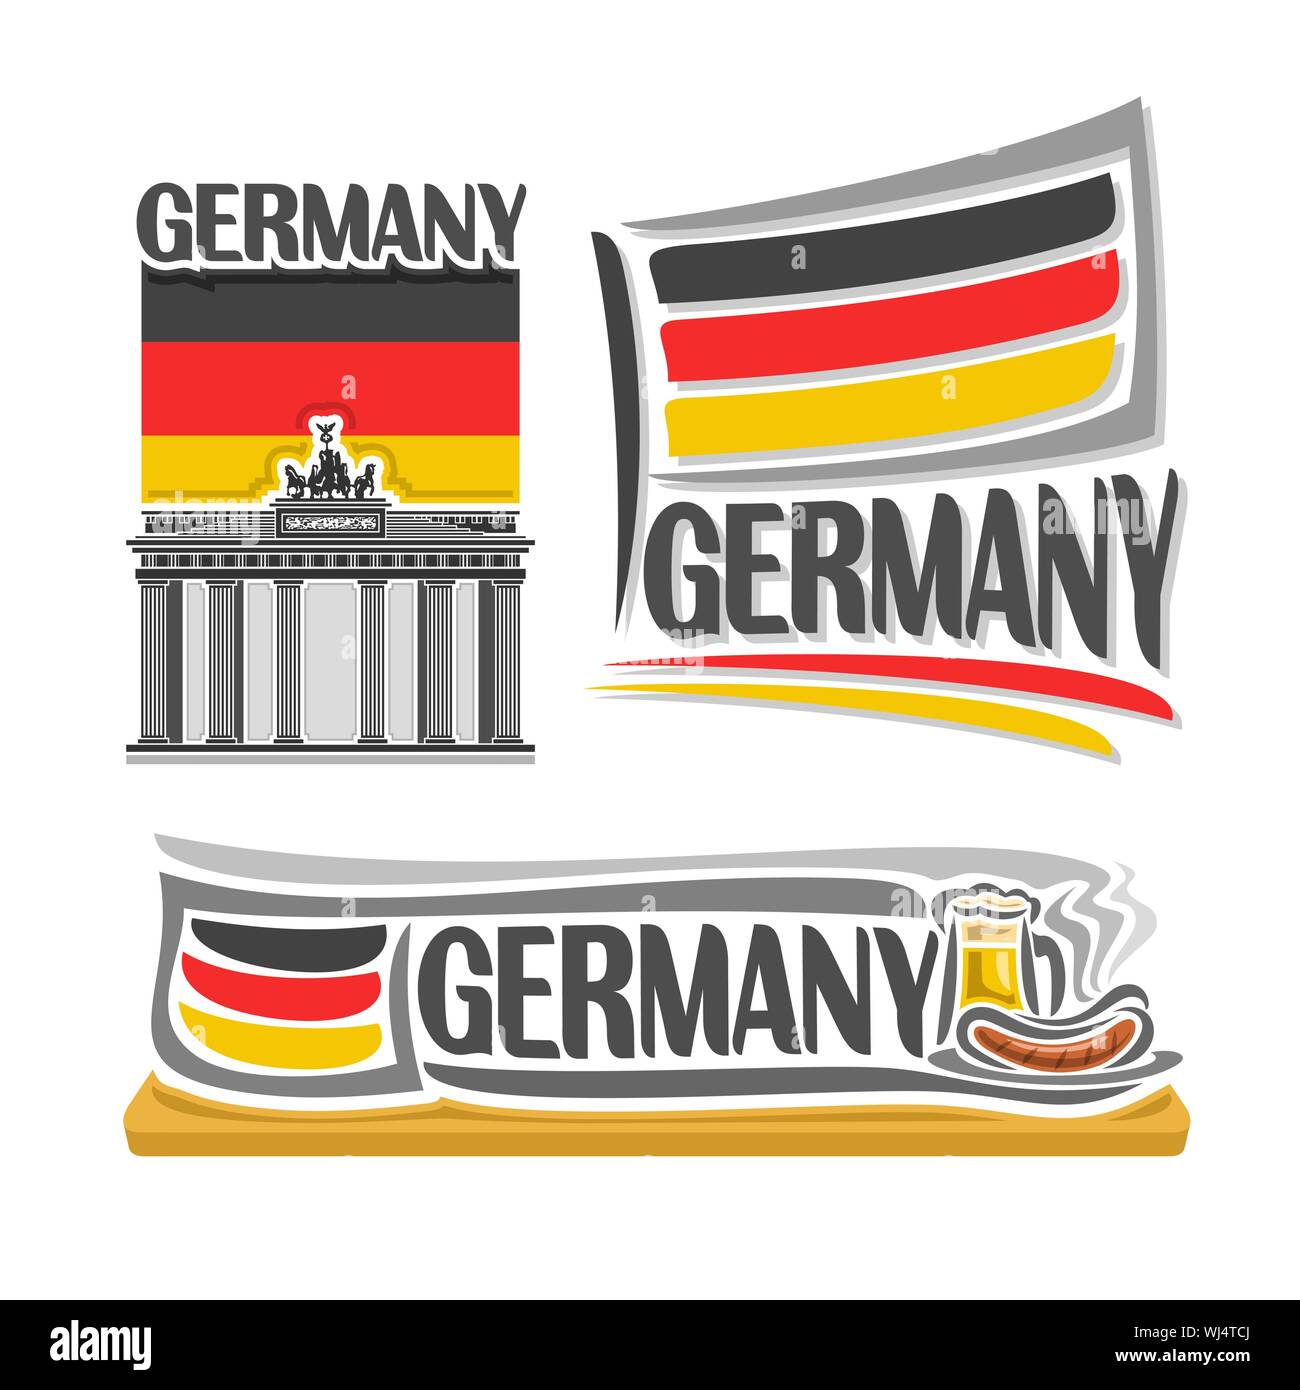 Vector illustration of logo for Germany, 3 isolated illustrations: flag over Brandenburg gate, symbol of Germany architecture and national state flag Stock Vector